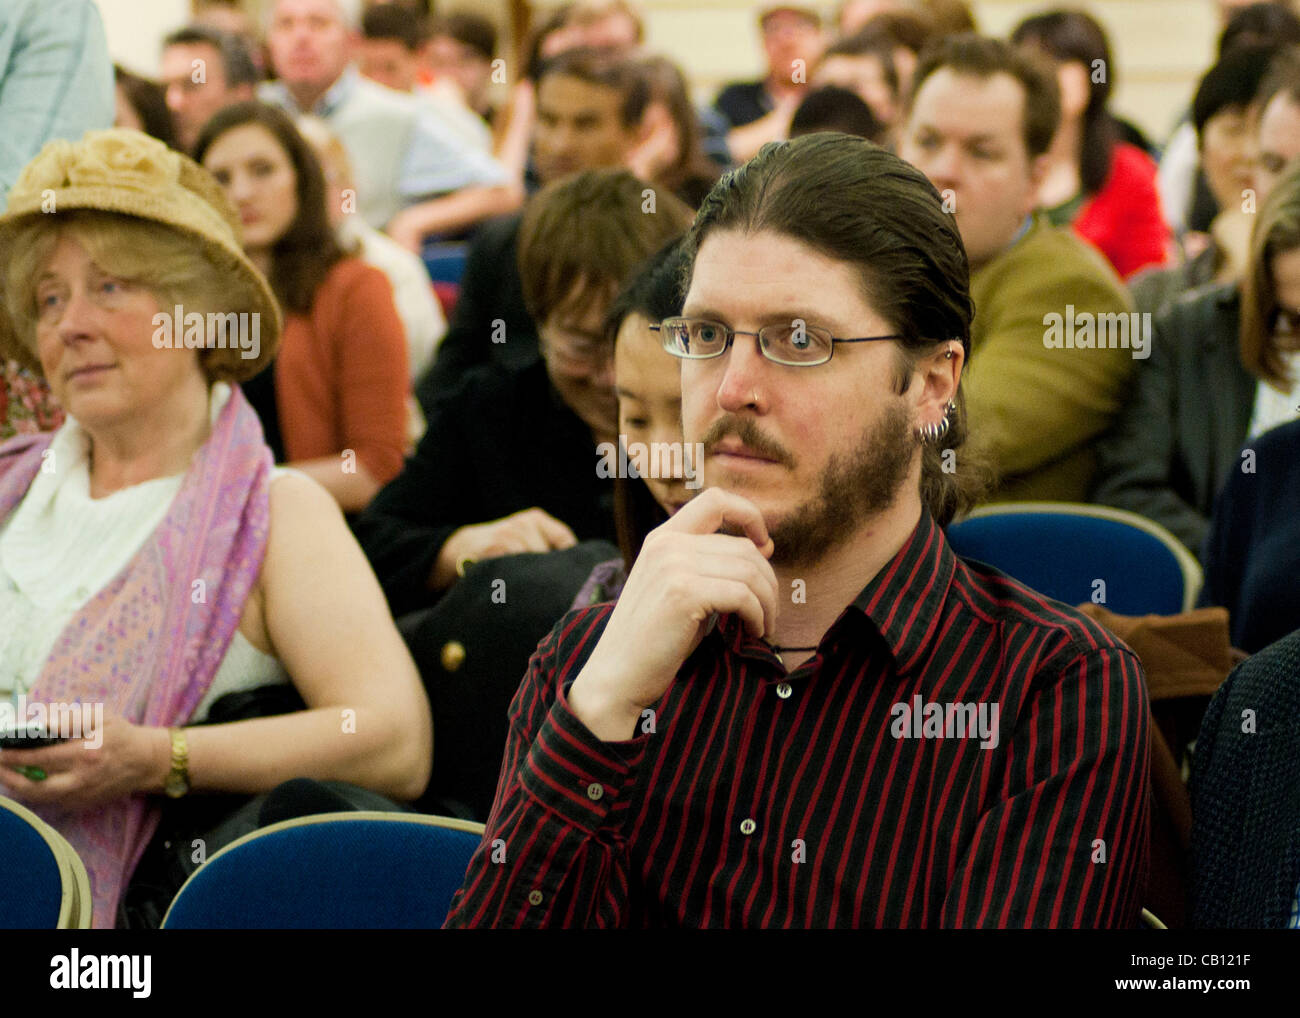 London, UK. 17/05/12. President of the NUJ,  Donnacha Delong attends Hacked Off, the Coordinating Committee for Media Reform at the Central Methodist Church. Stock Photo